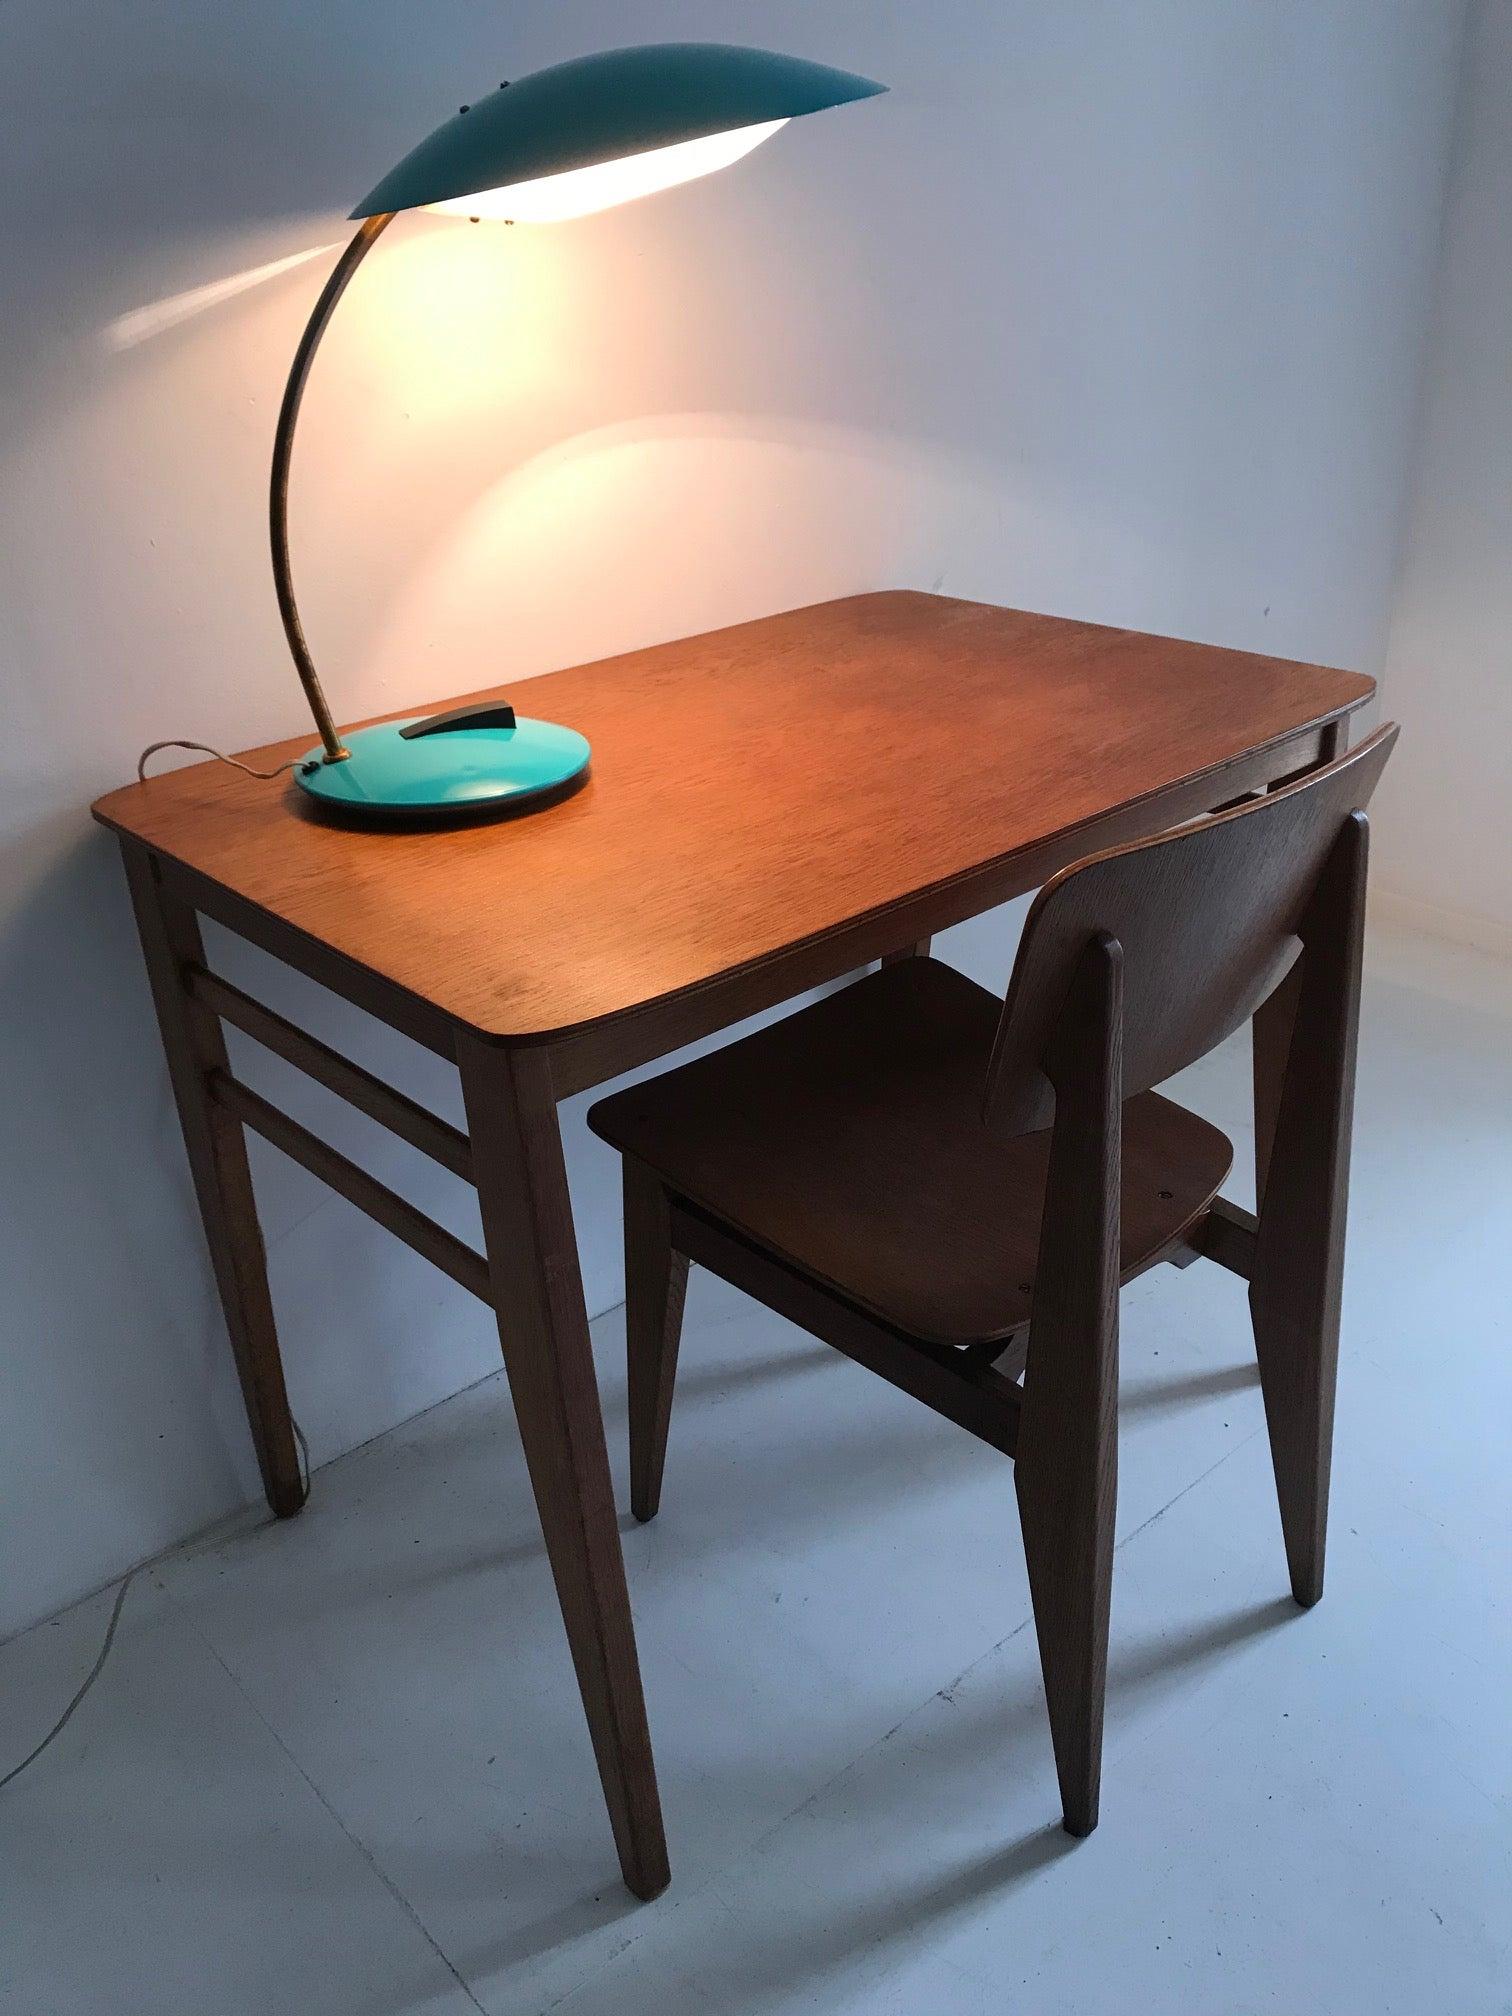 Large desk lamp, 1950s. Green lacquered metal lamp. Original light reflector. In a perfect state.